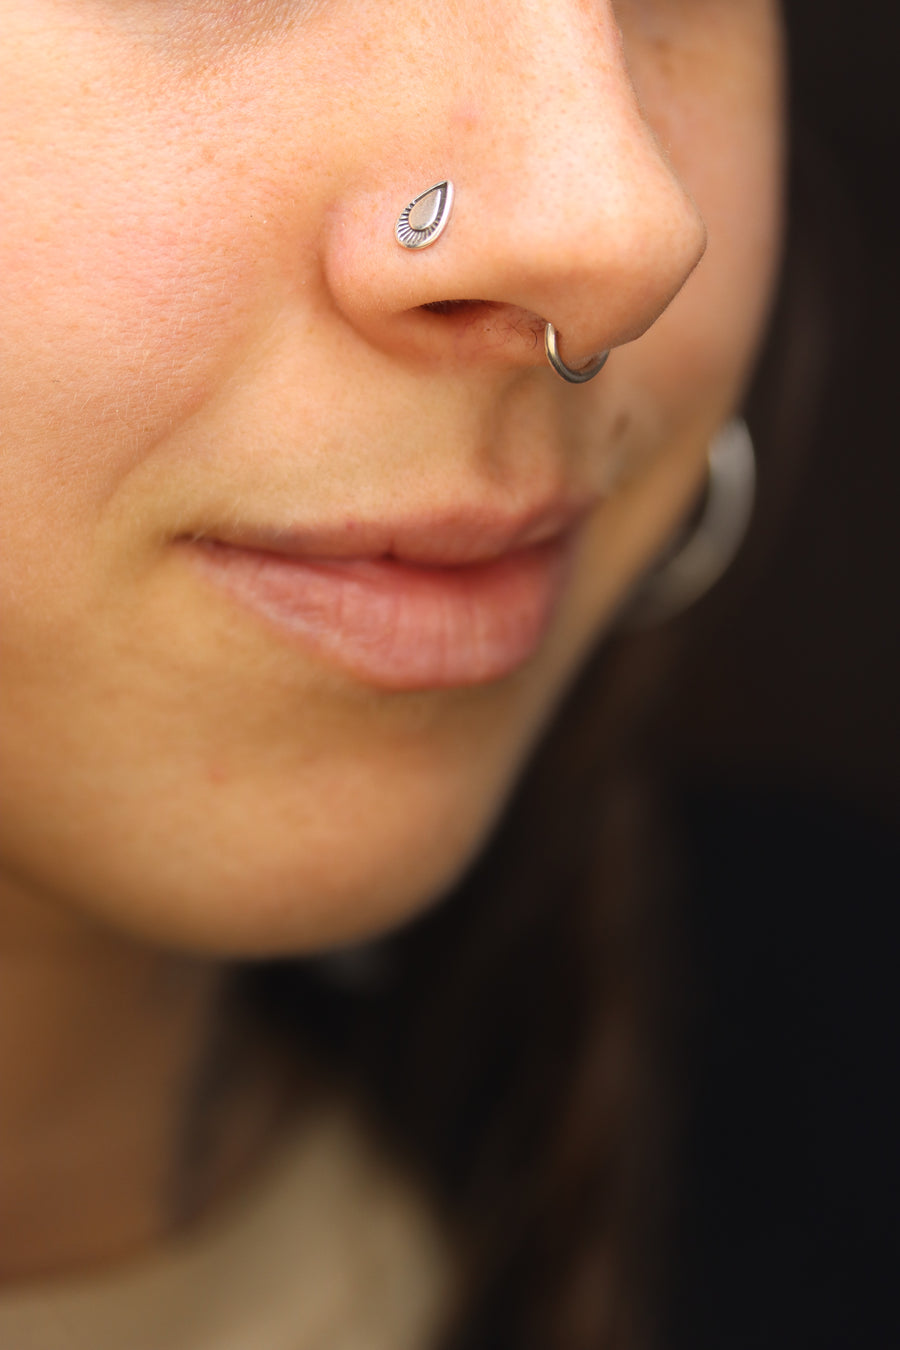 Stamped Silver Nose Stud